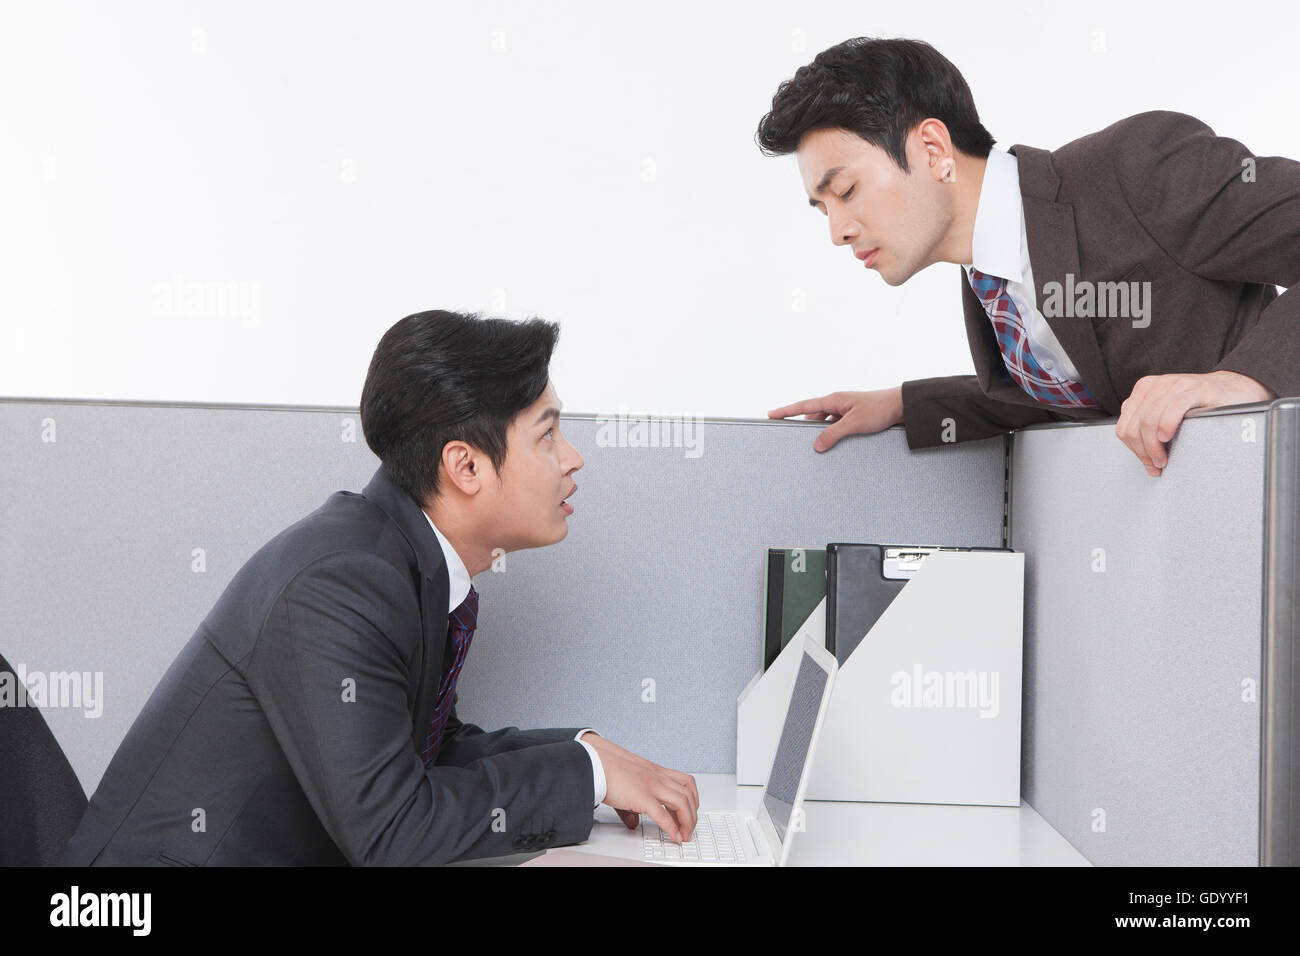 Side view portrait of two nervous business men face ro faceat work Stock Photo